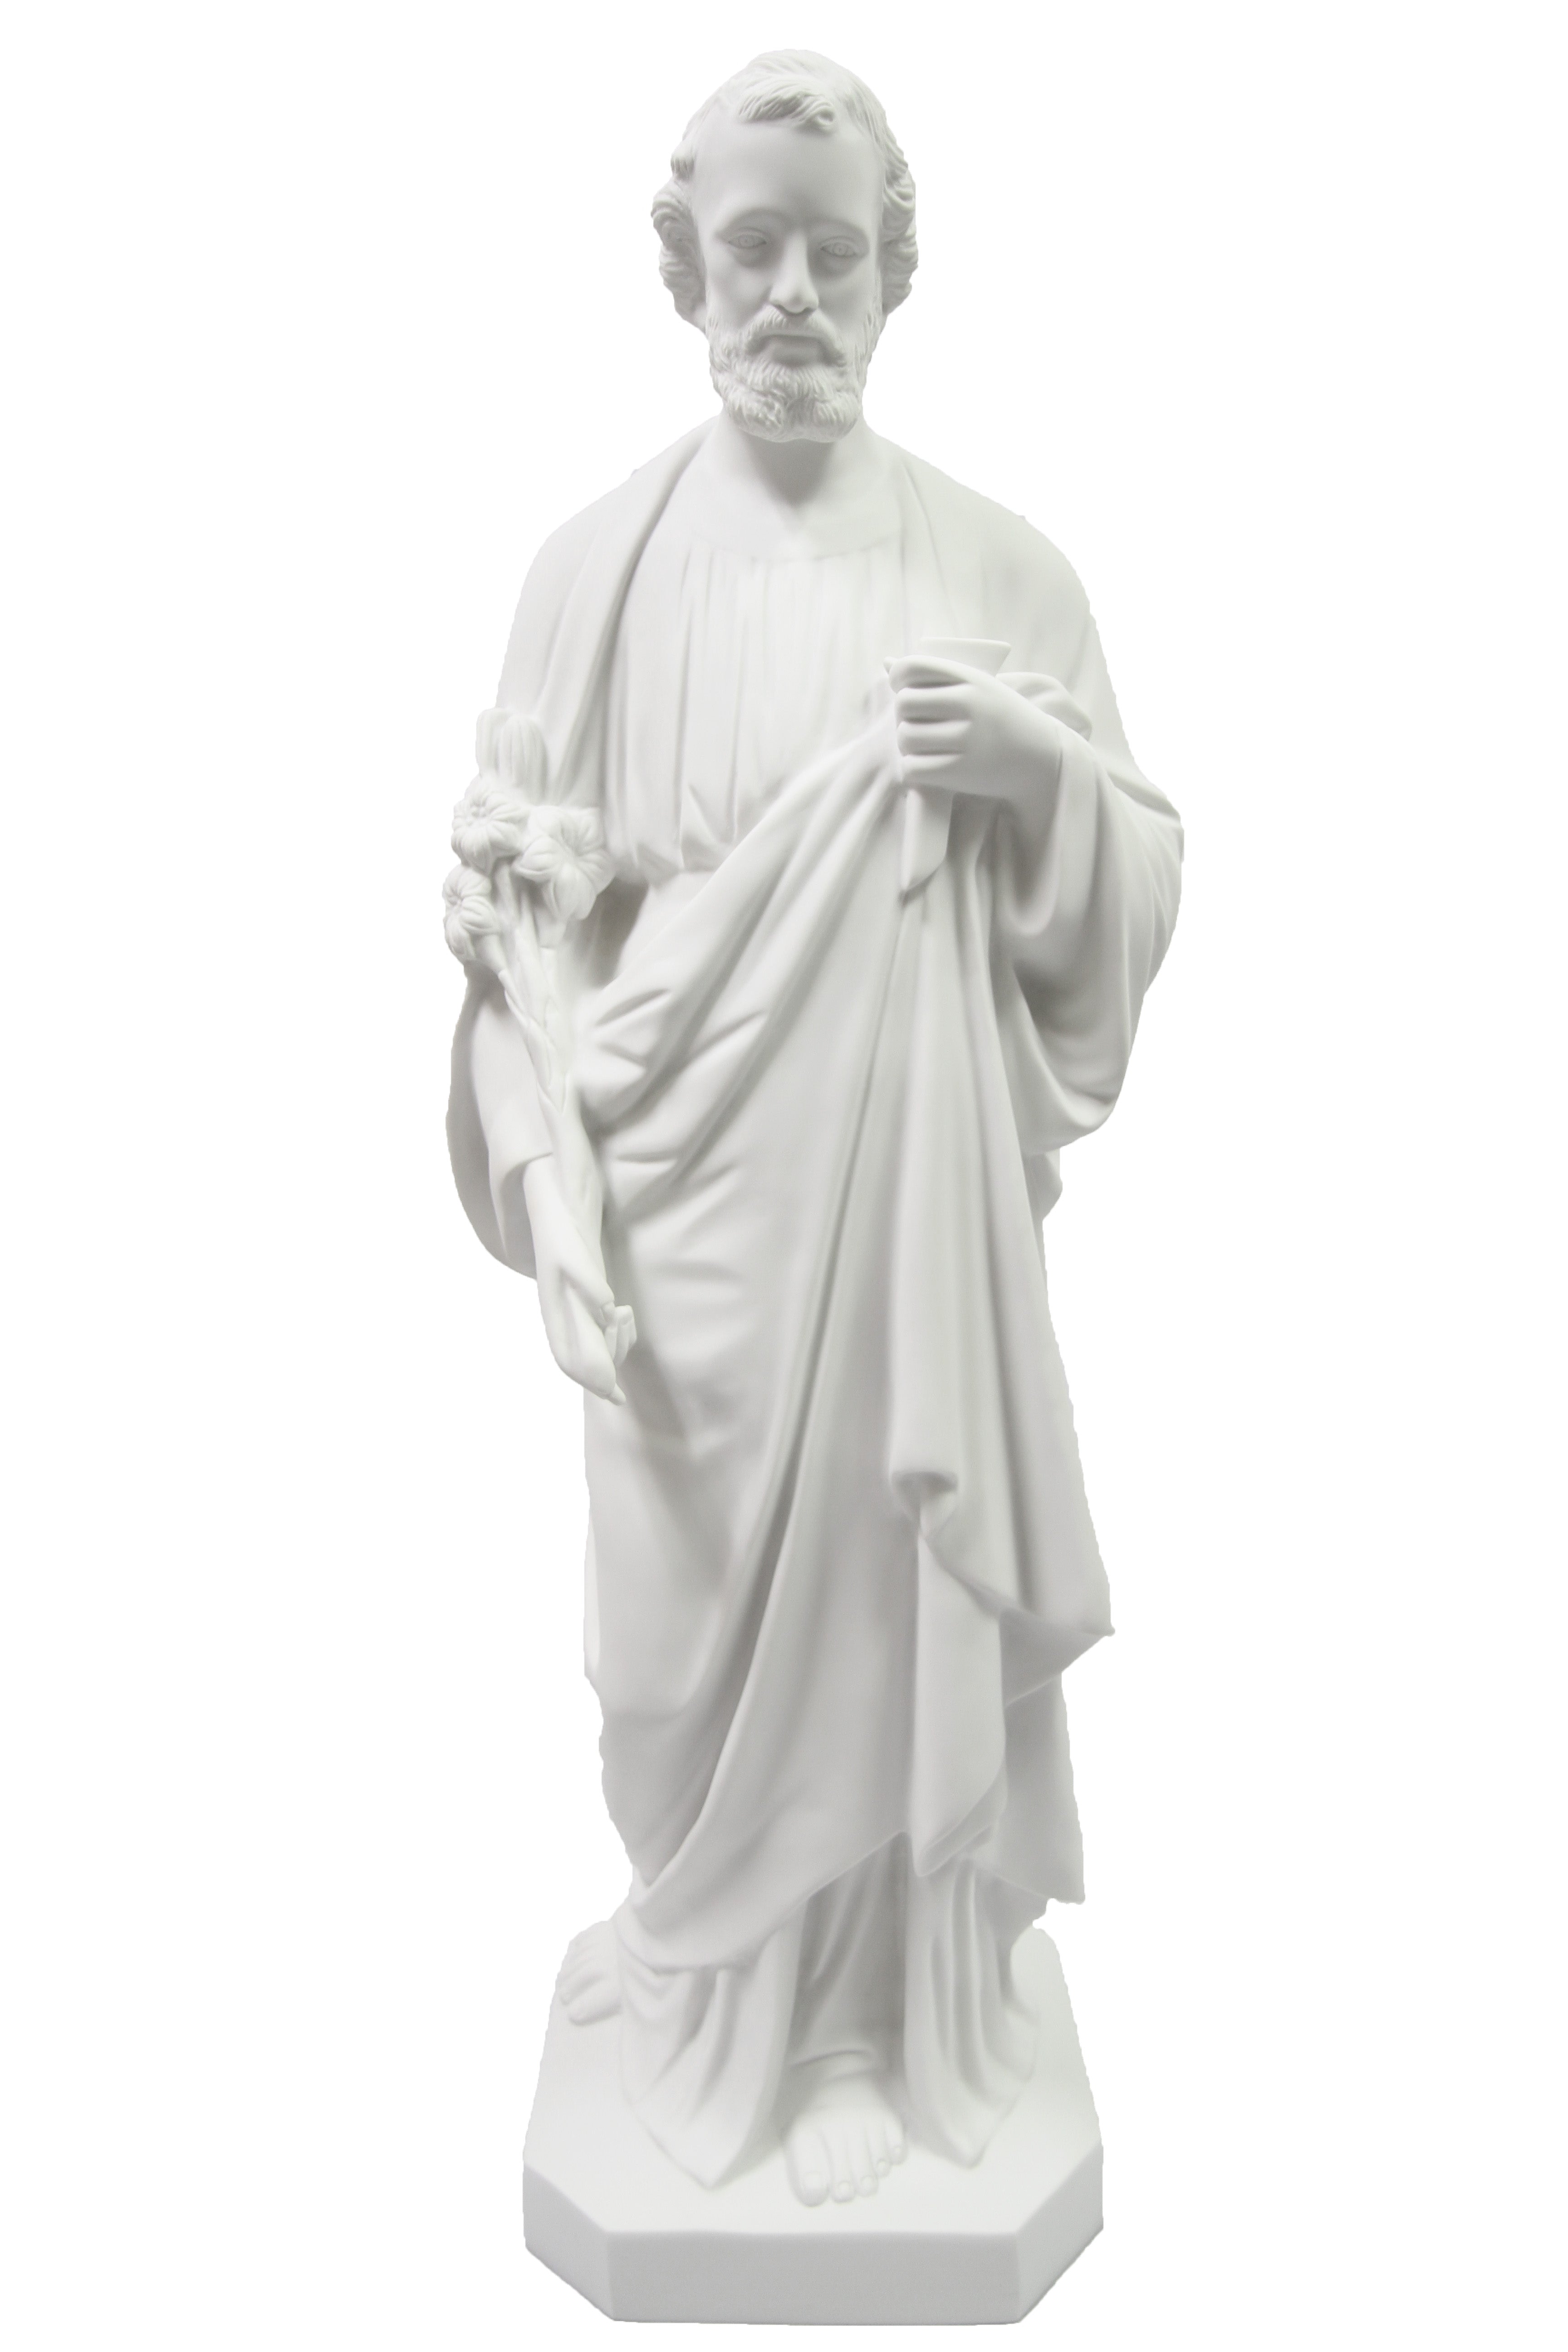 40 Inch Saint St Joseph the Worker Catholic Statue Sculpture Vittoria Collection Made in Italy